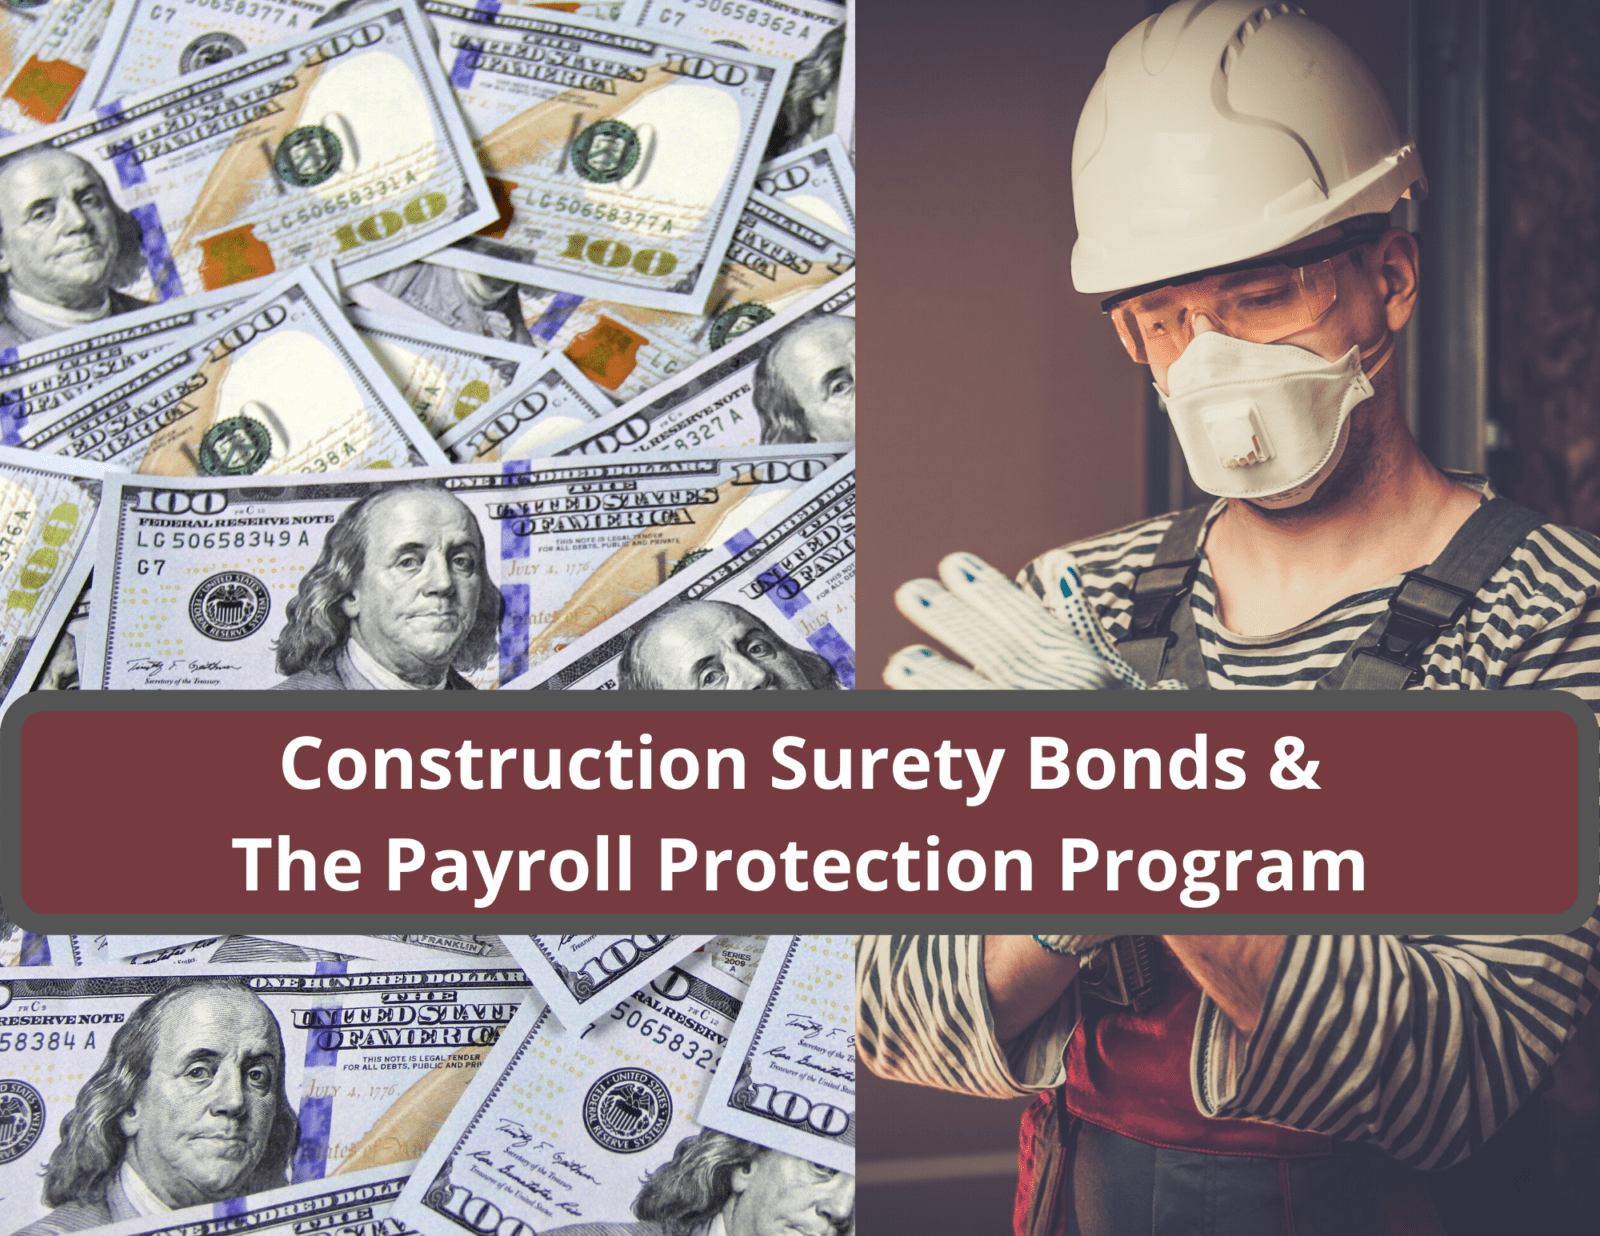 Construction Surety Bonds and the Payroll Protection Program - This image is a contractor with a mask with $100 bills beside the contractor.